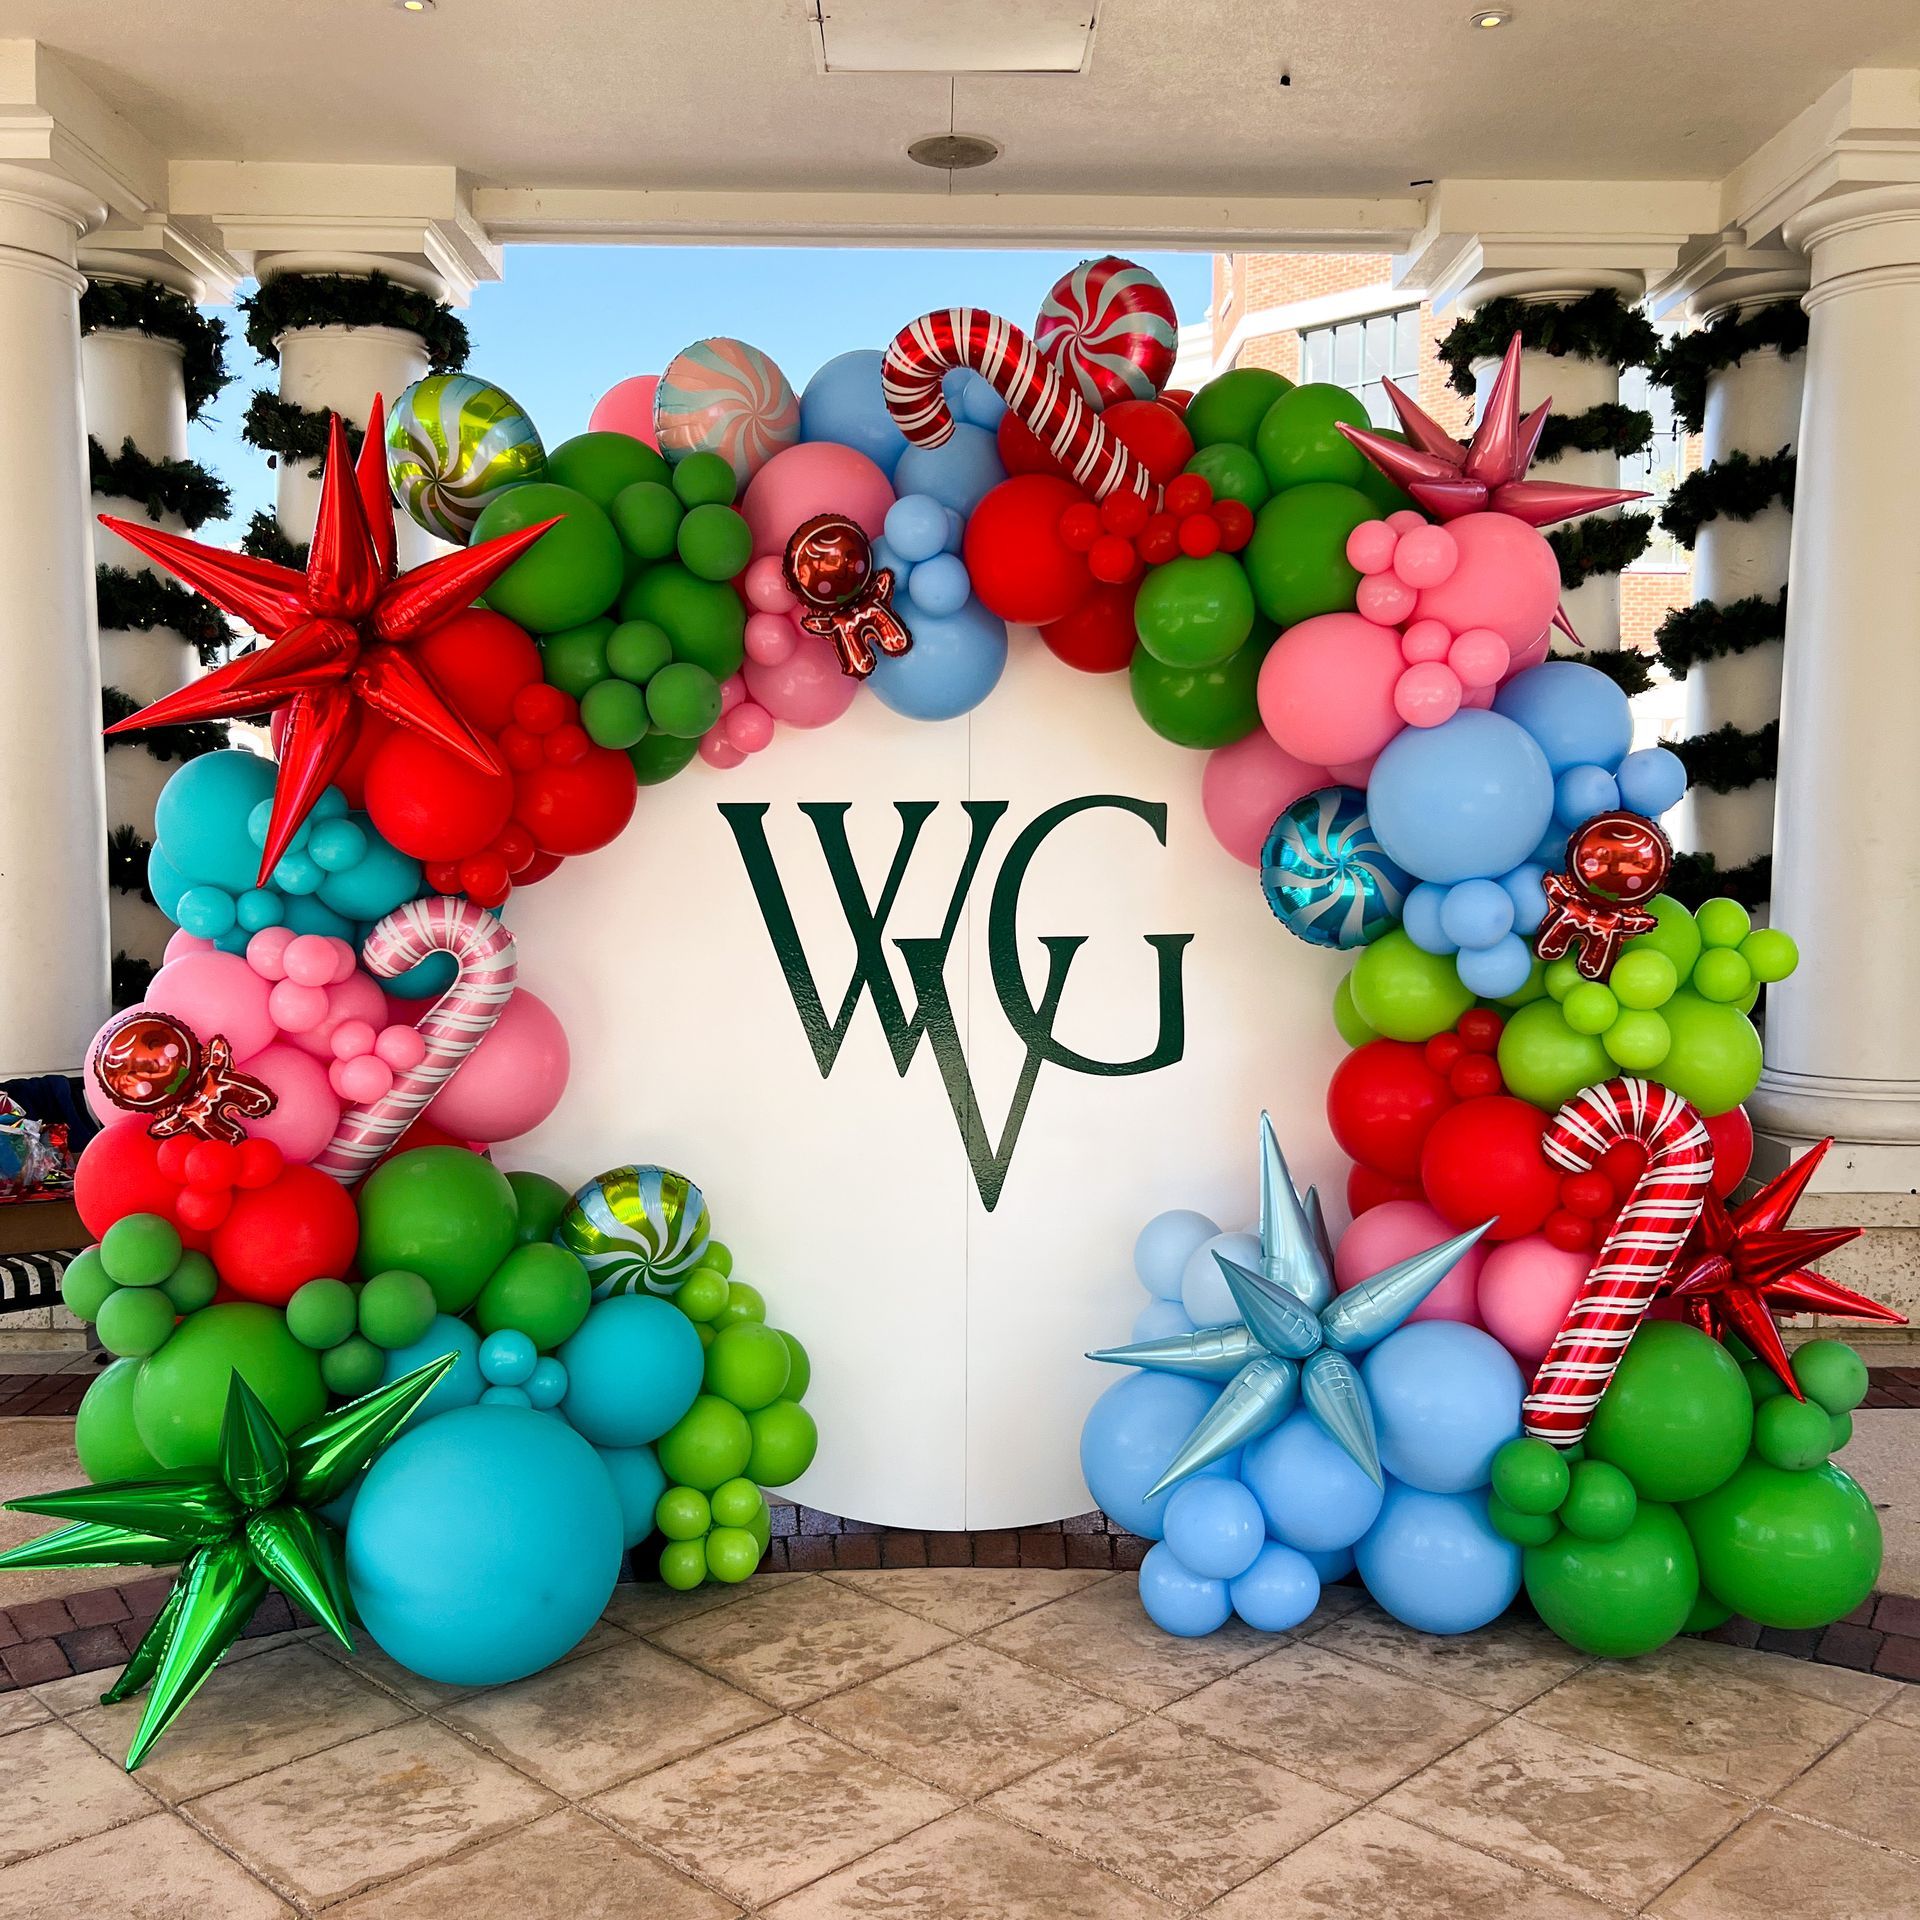 A christmas balloon arch with the initials wg on it